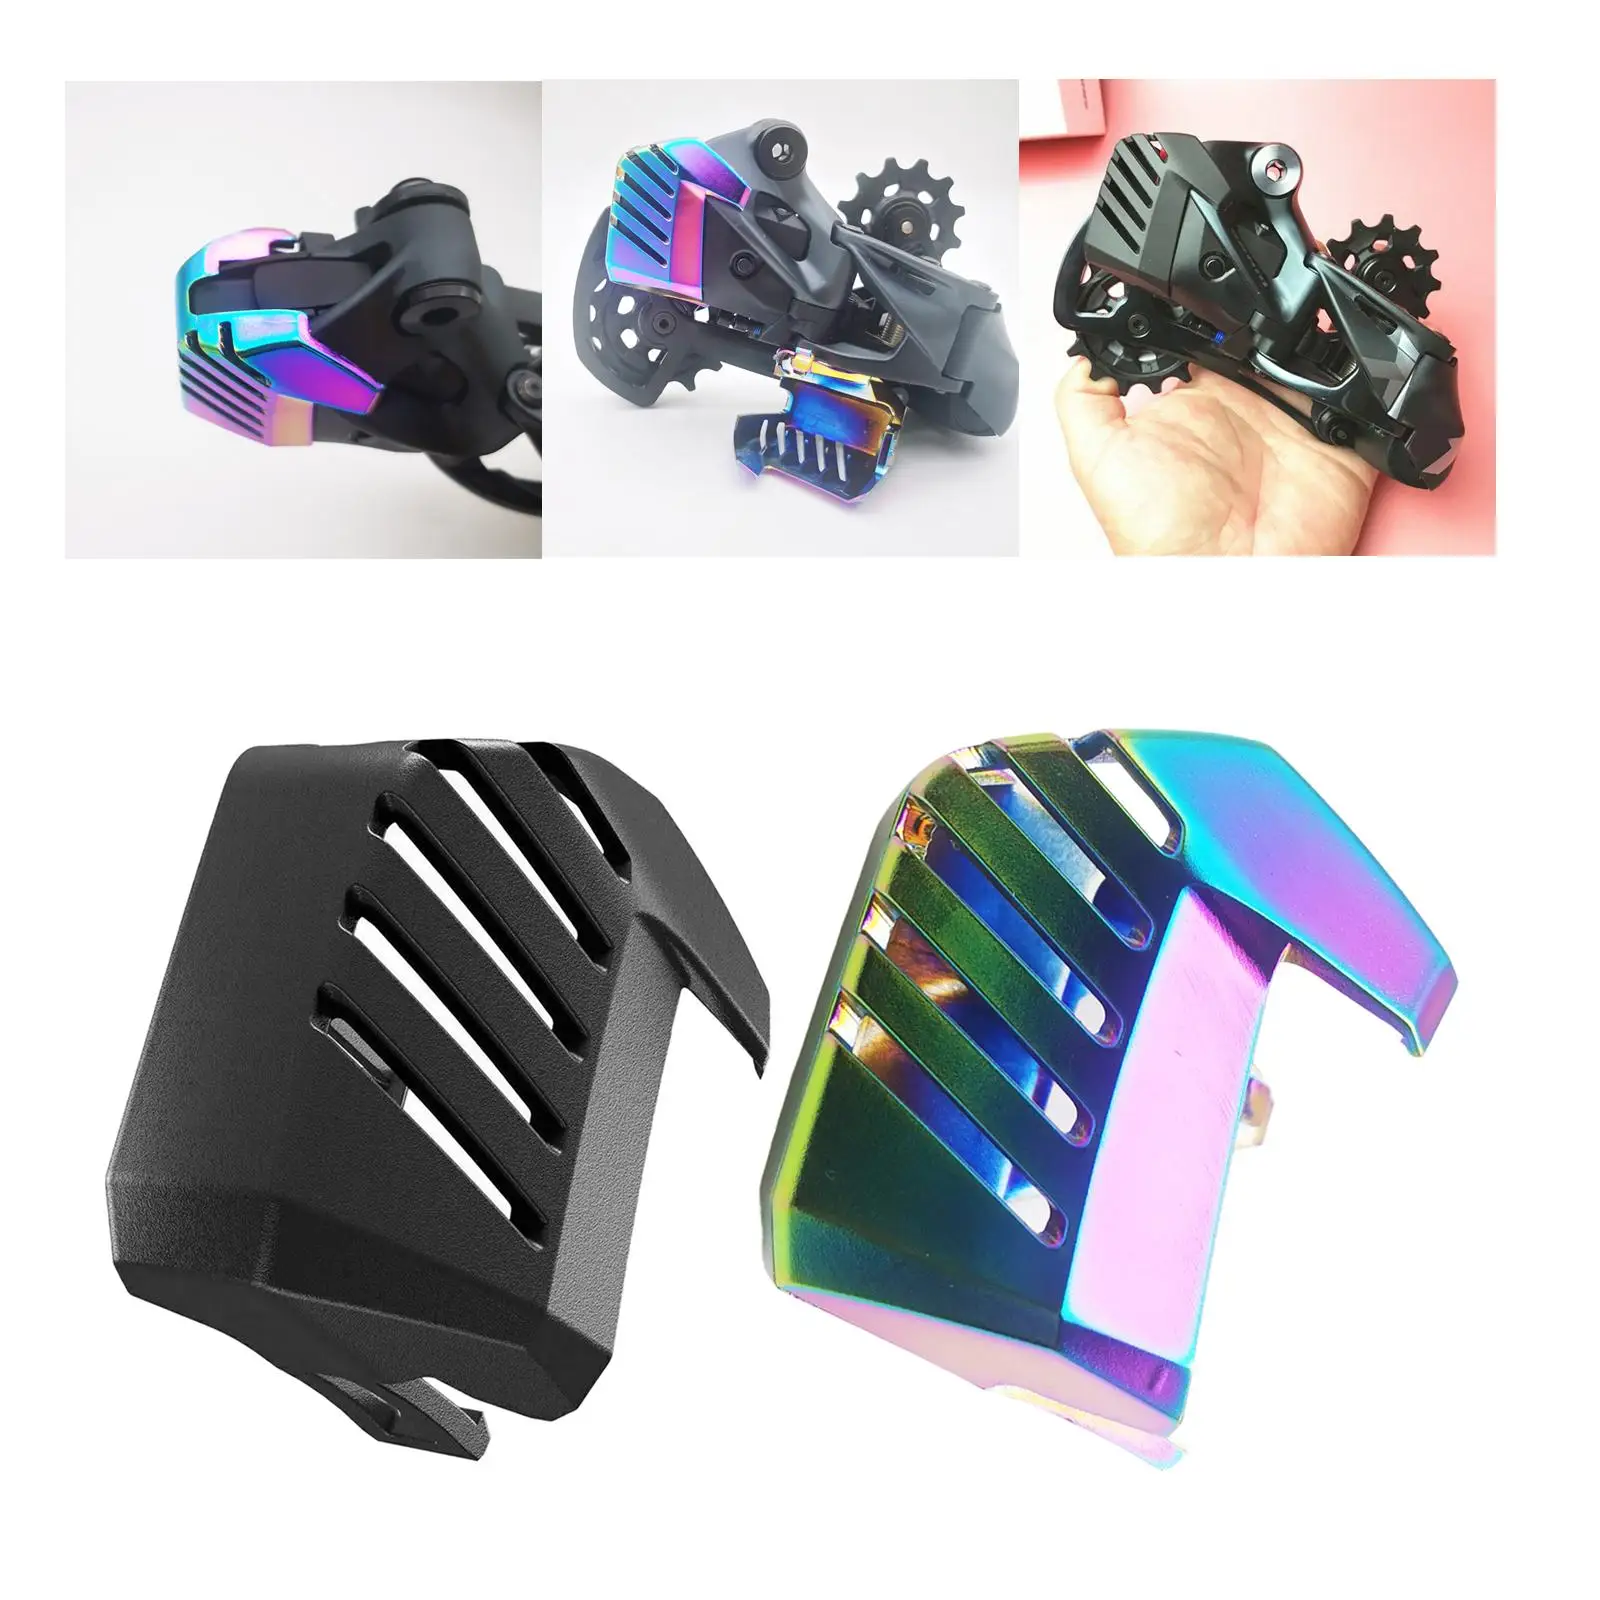 Rear Derailleur Protector Cover Case Bicycle Protective for Gx Eagle x01 XX1 Axs Mountain Bike Durable Easy to Install